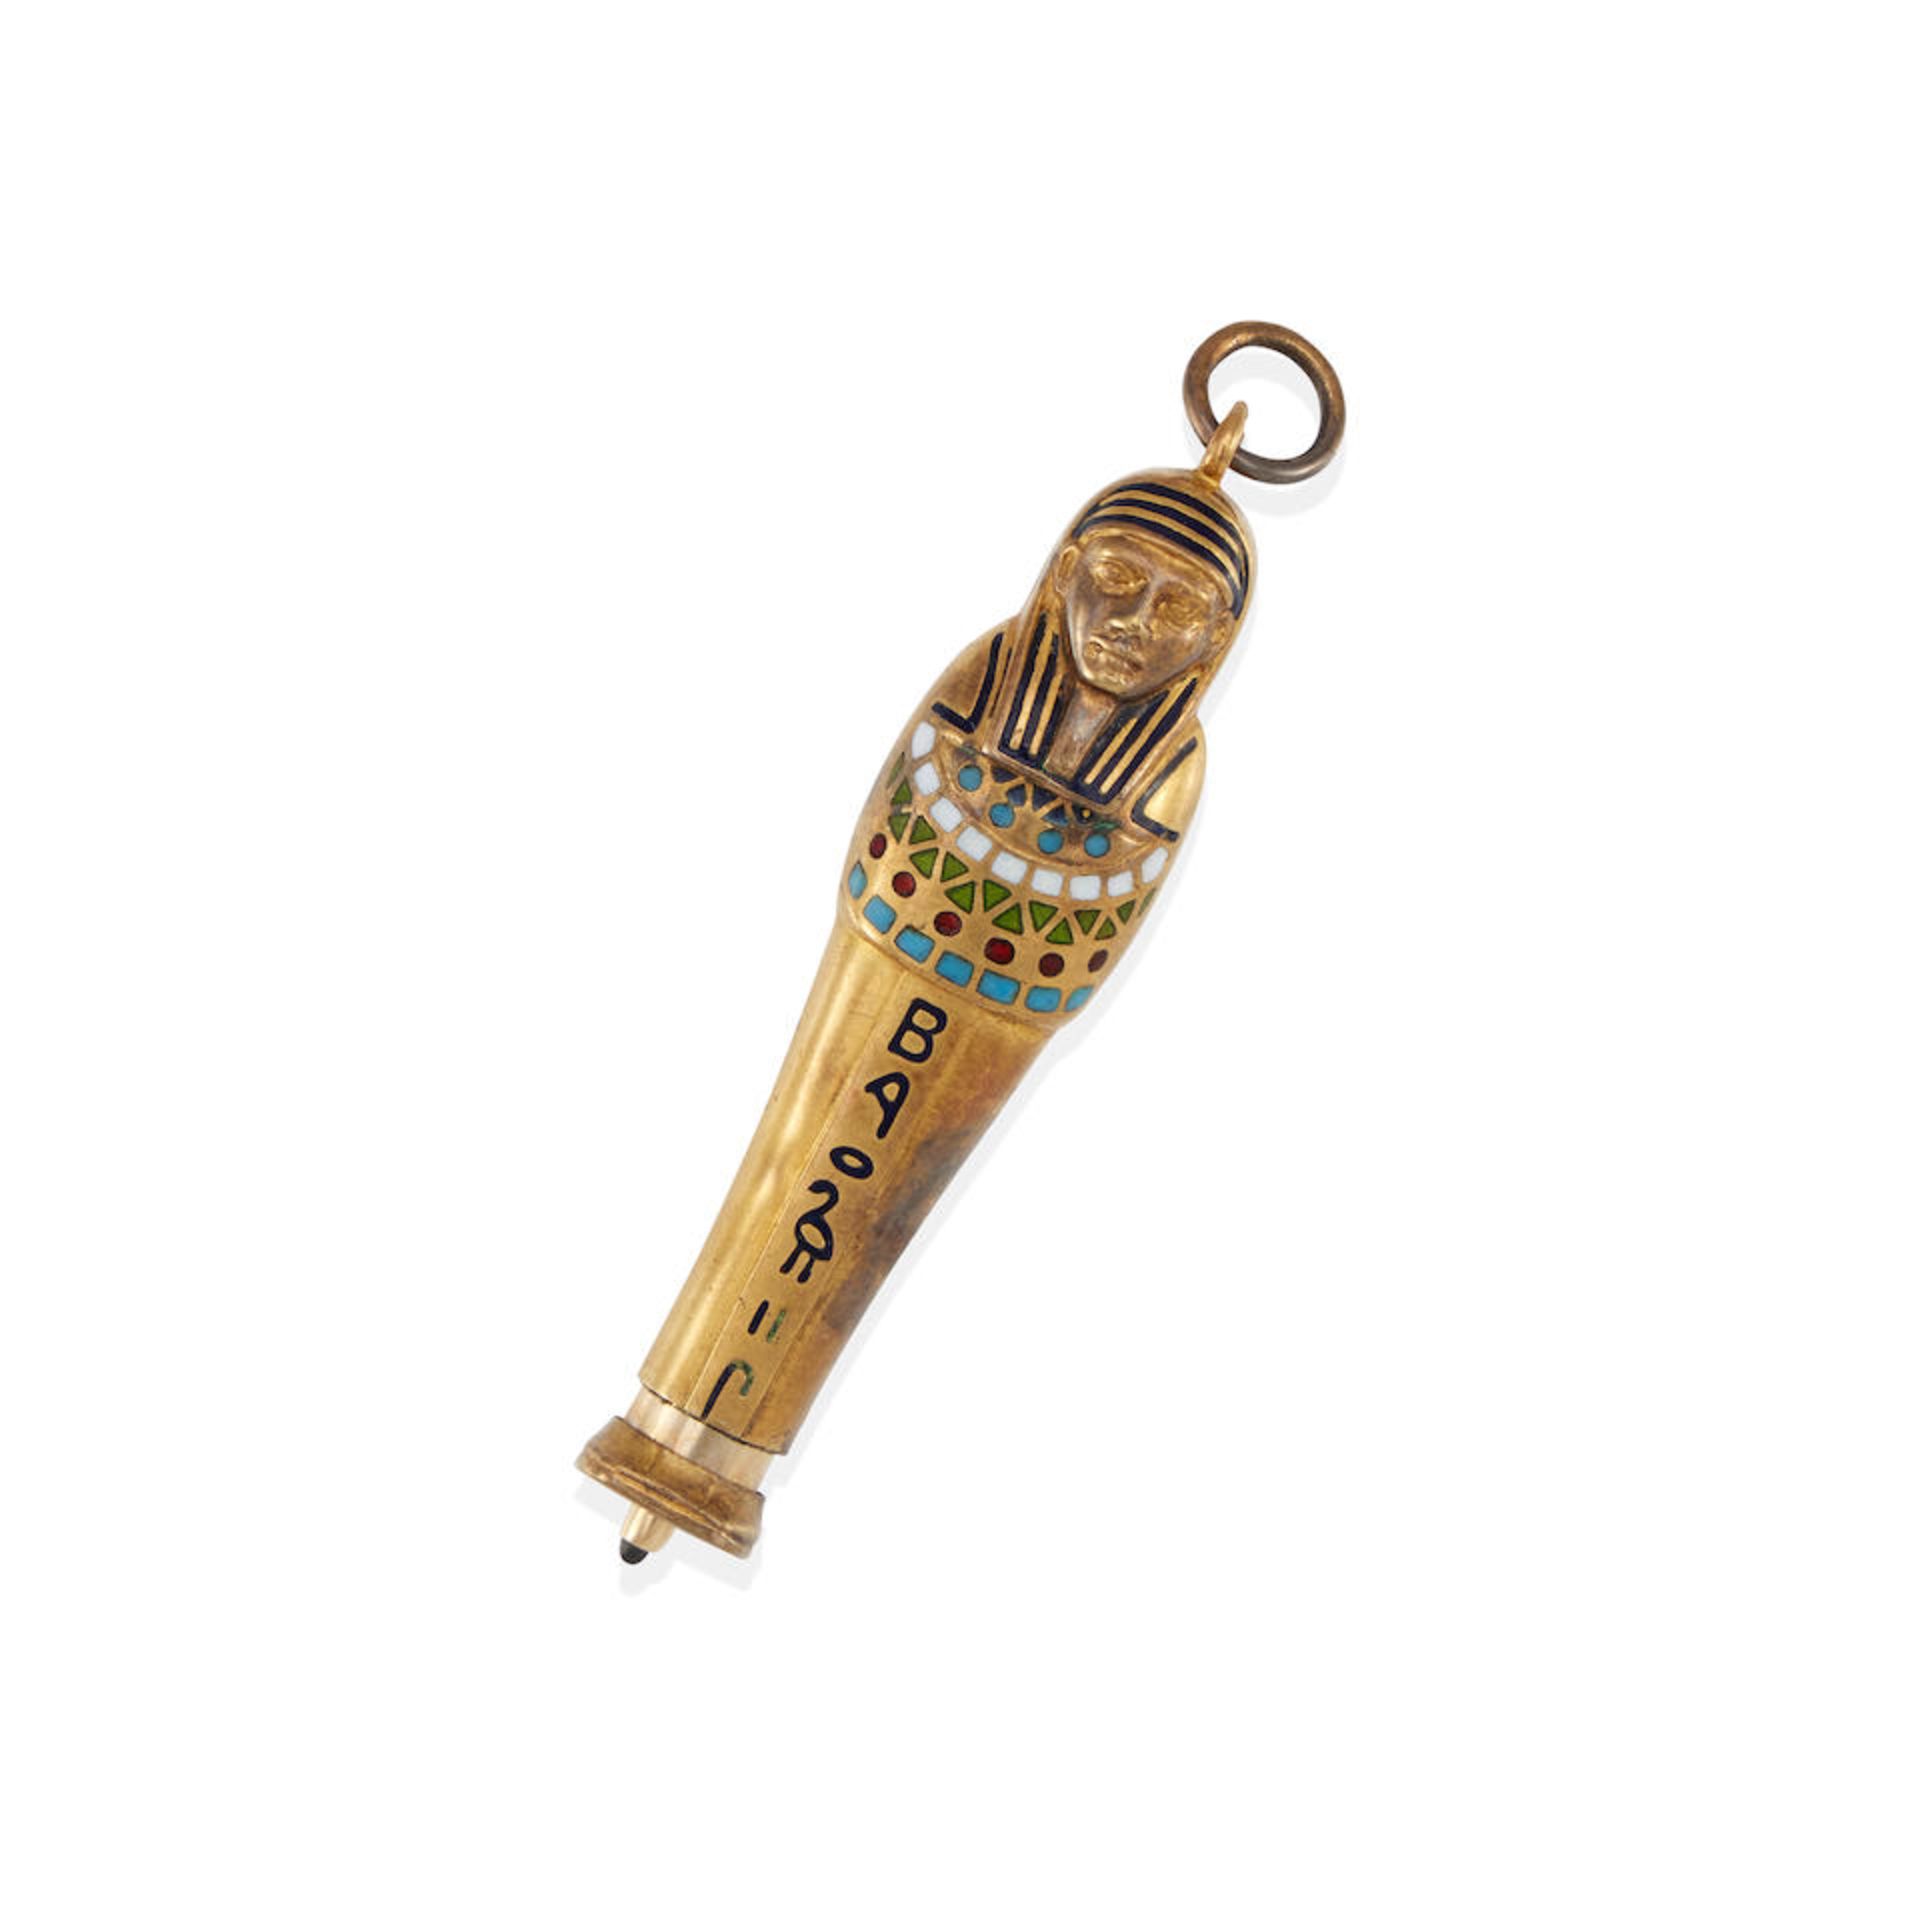 A GOLD AND ENAMEL EGYPTIAN CHARM/PENCIL